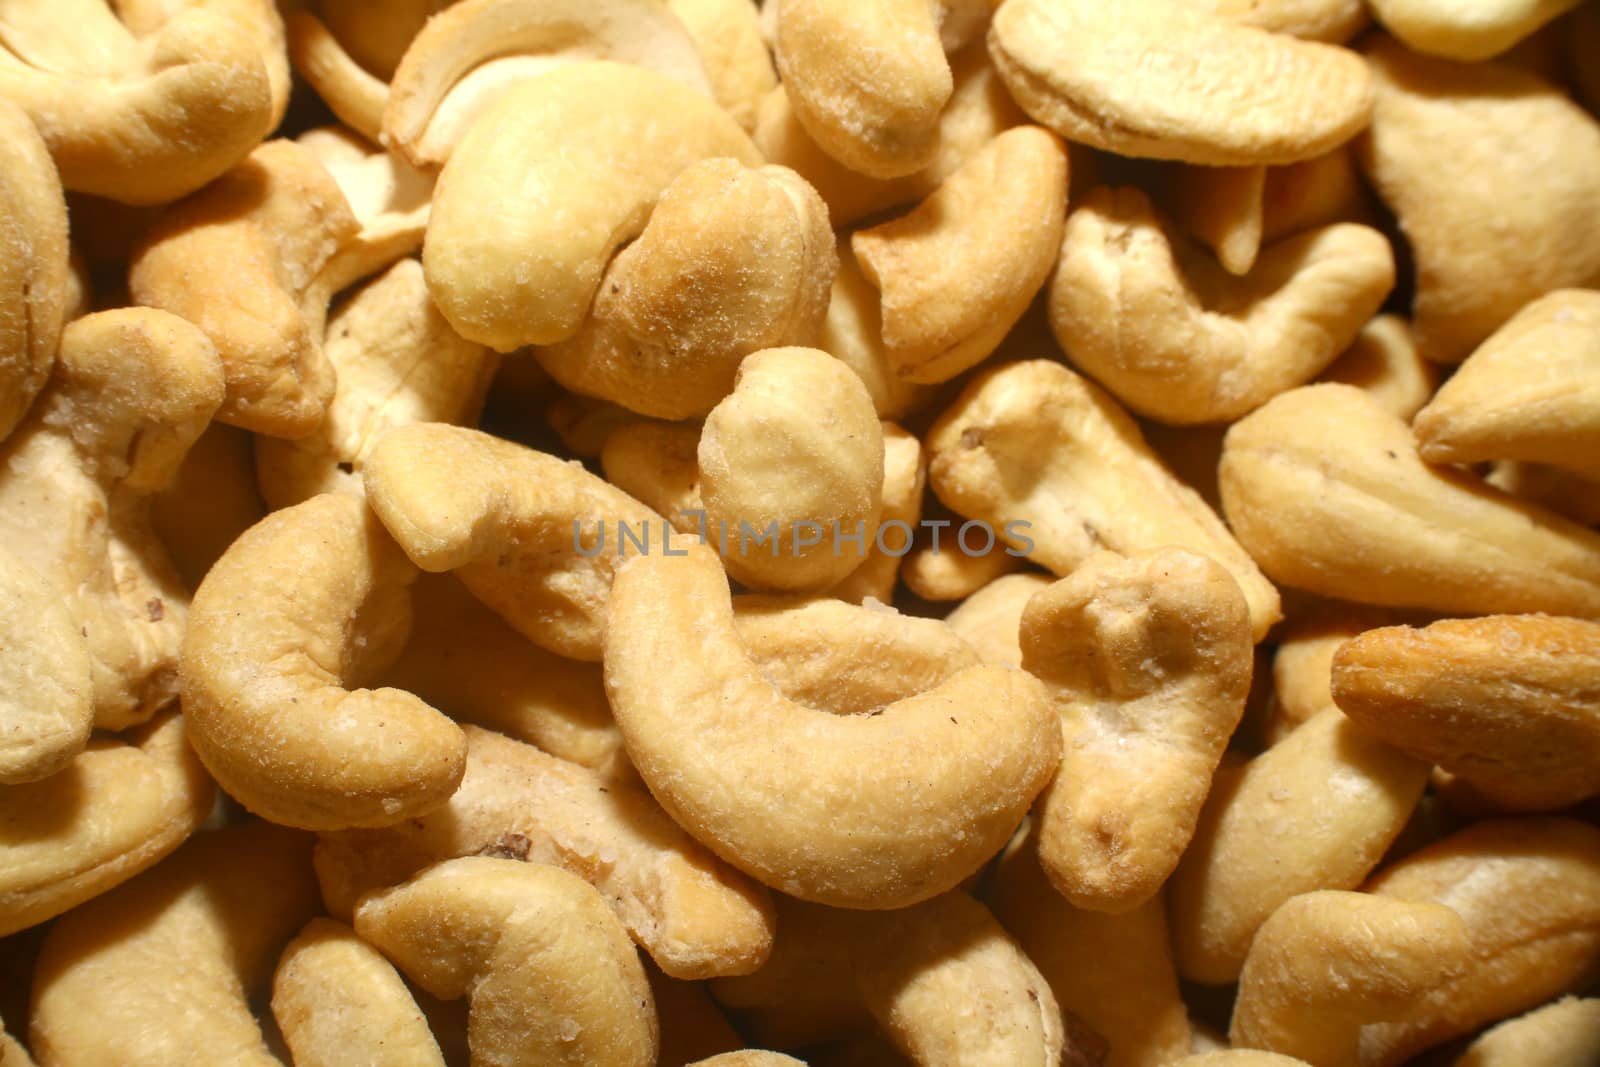 cashew nut food,baked salted close up